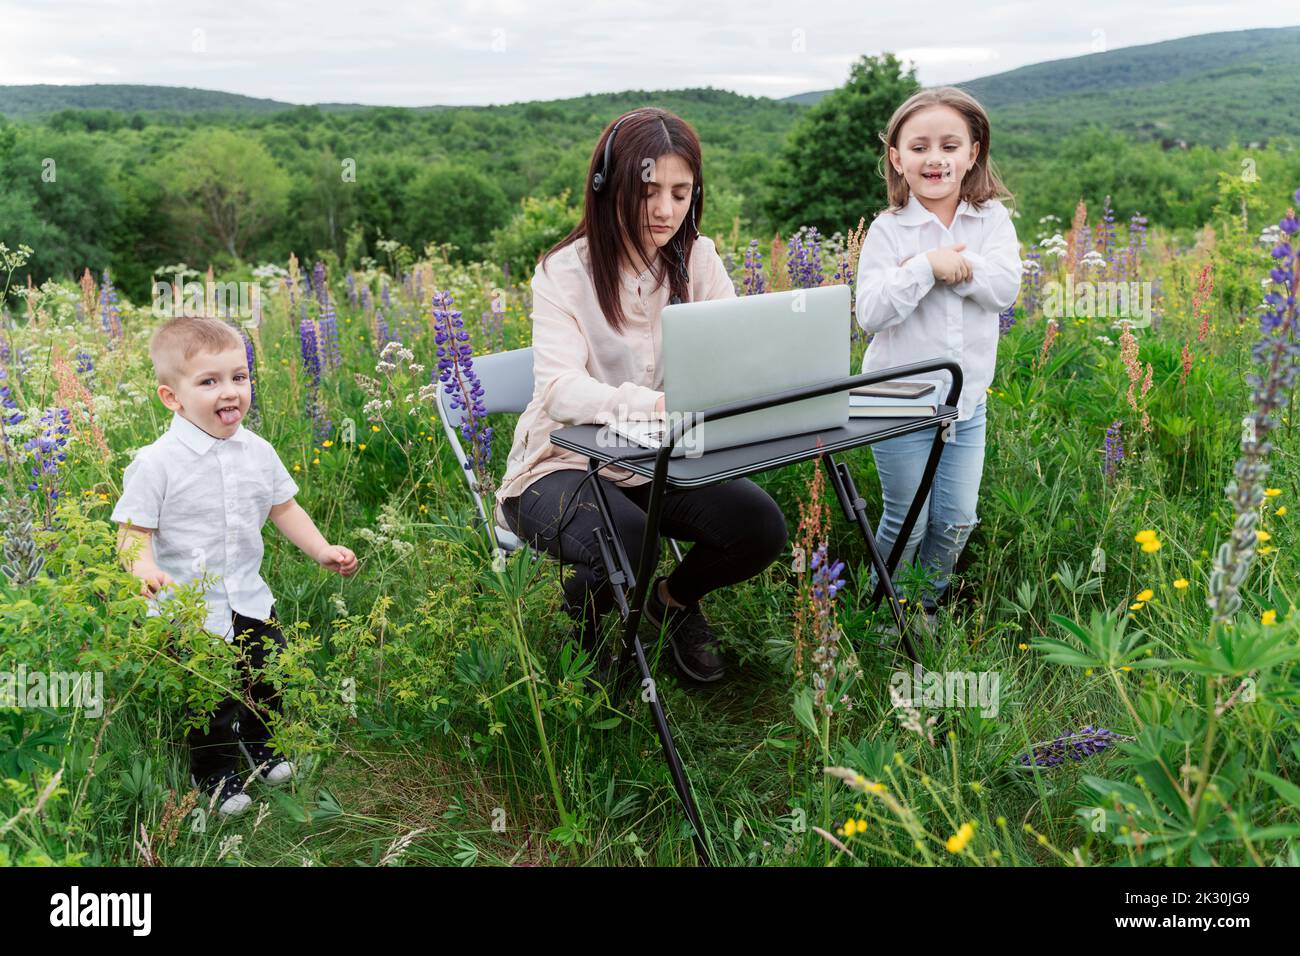 Playful children by mother working on laptop in meadow Stock Photo